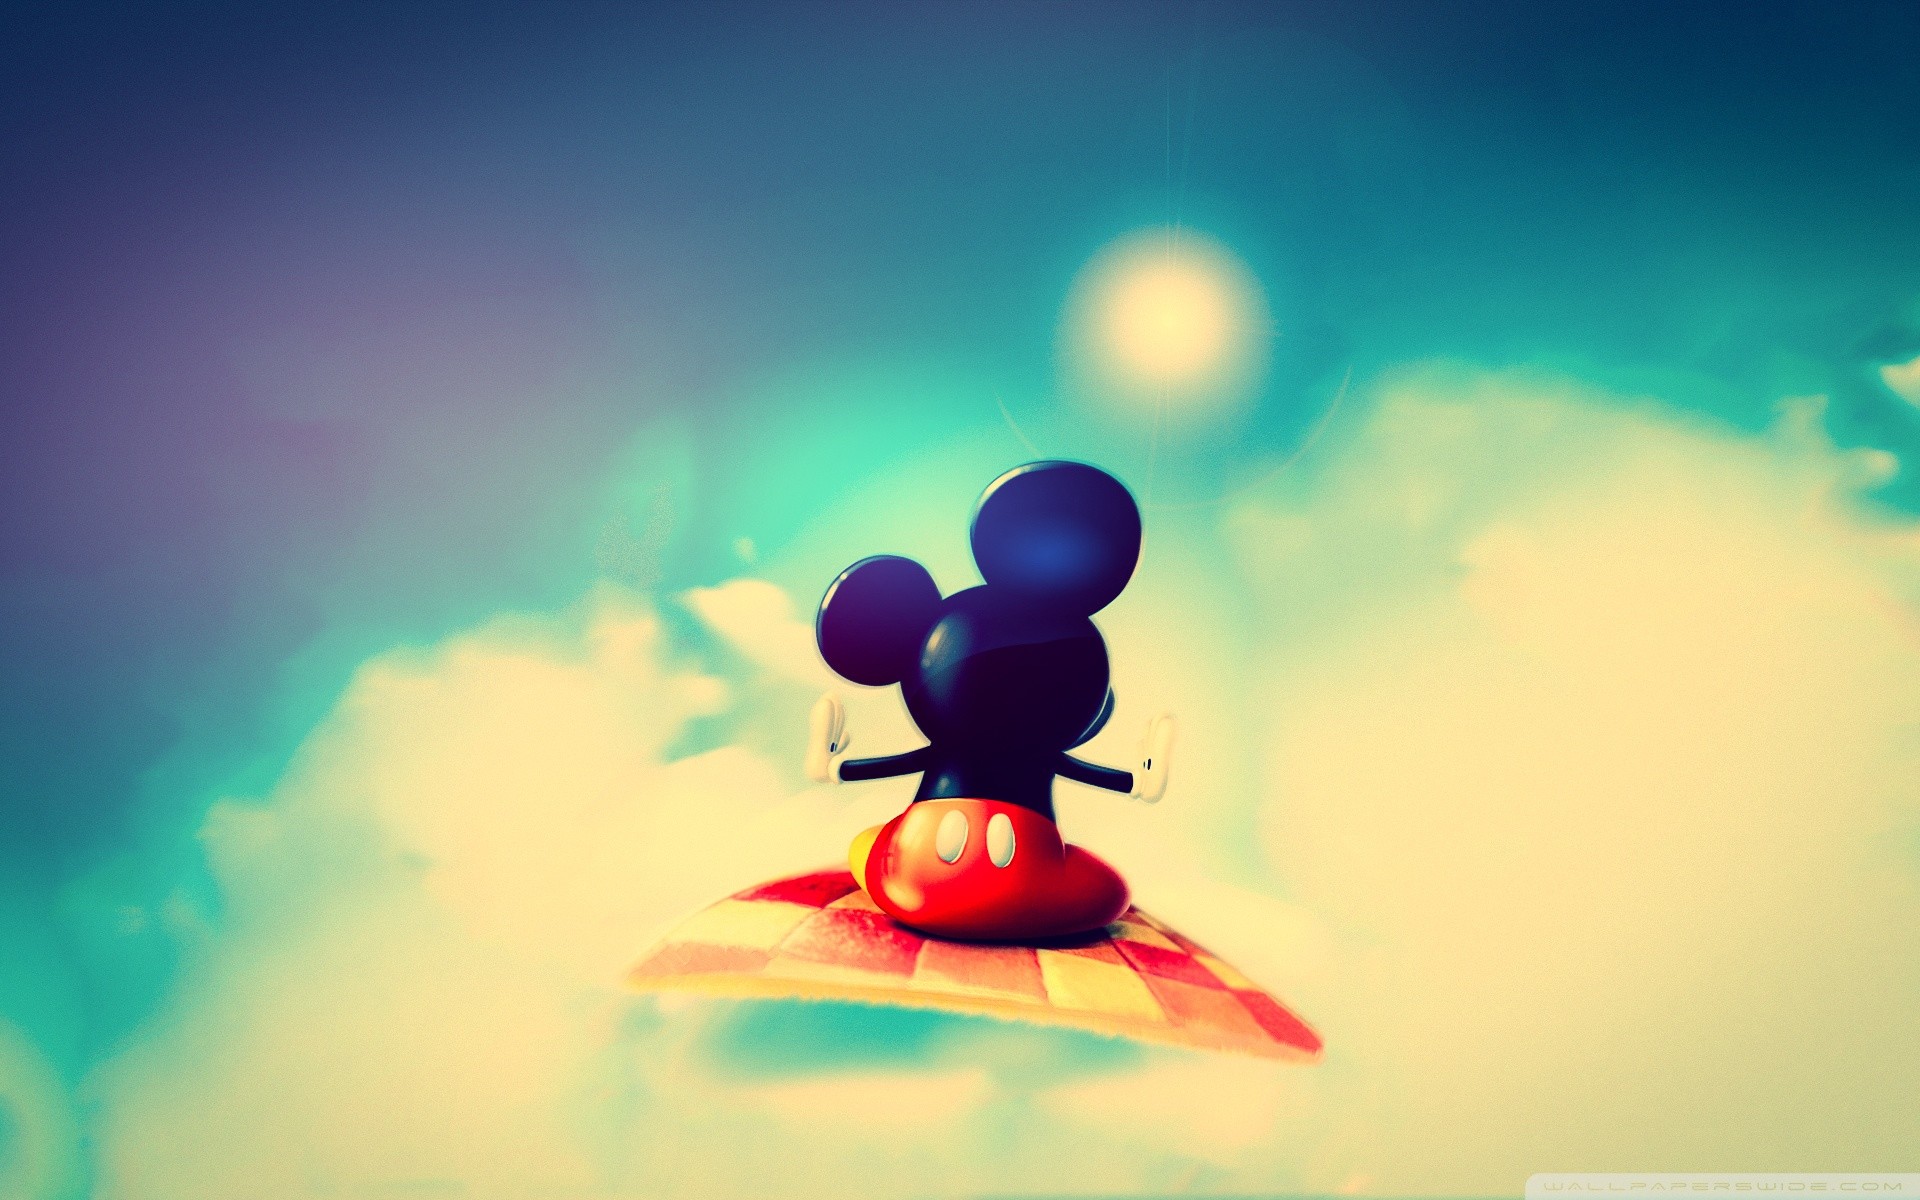 Disney Background for Computer